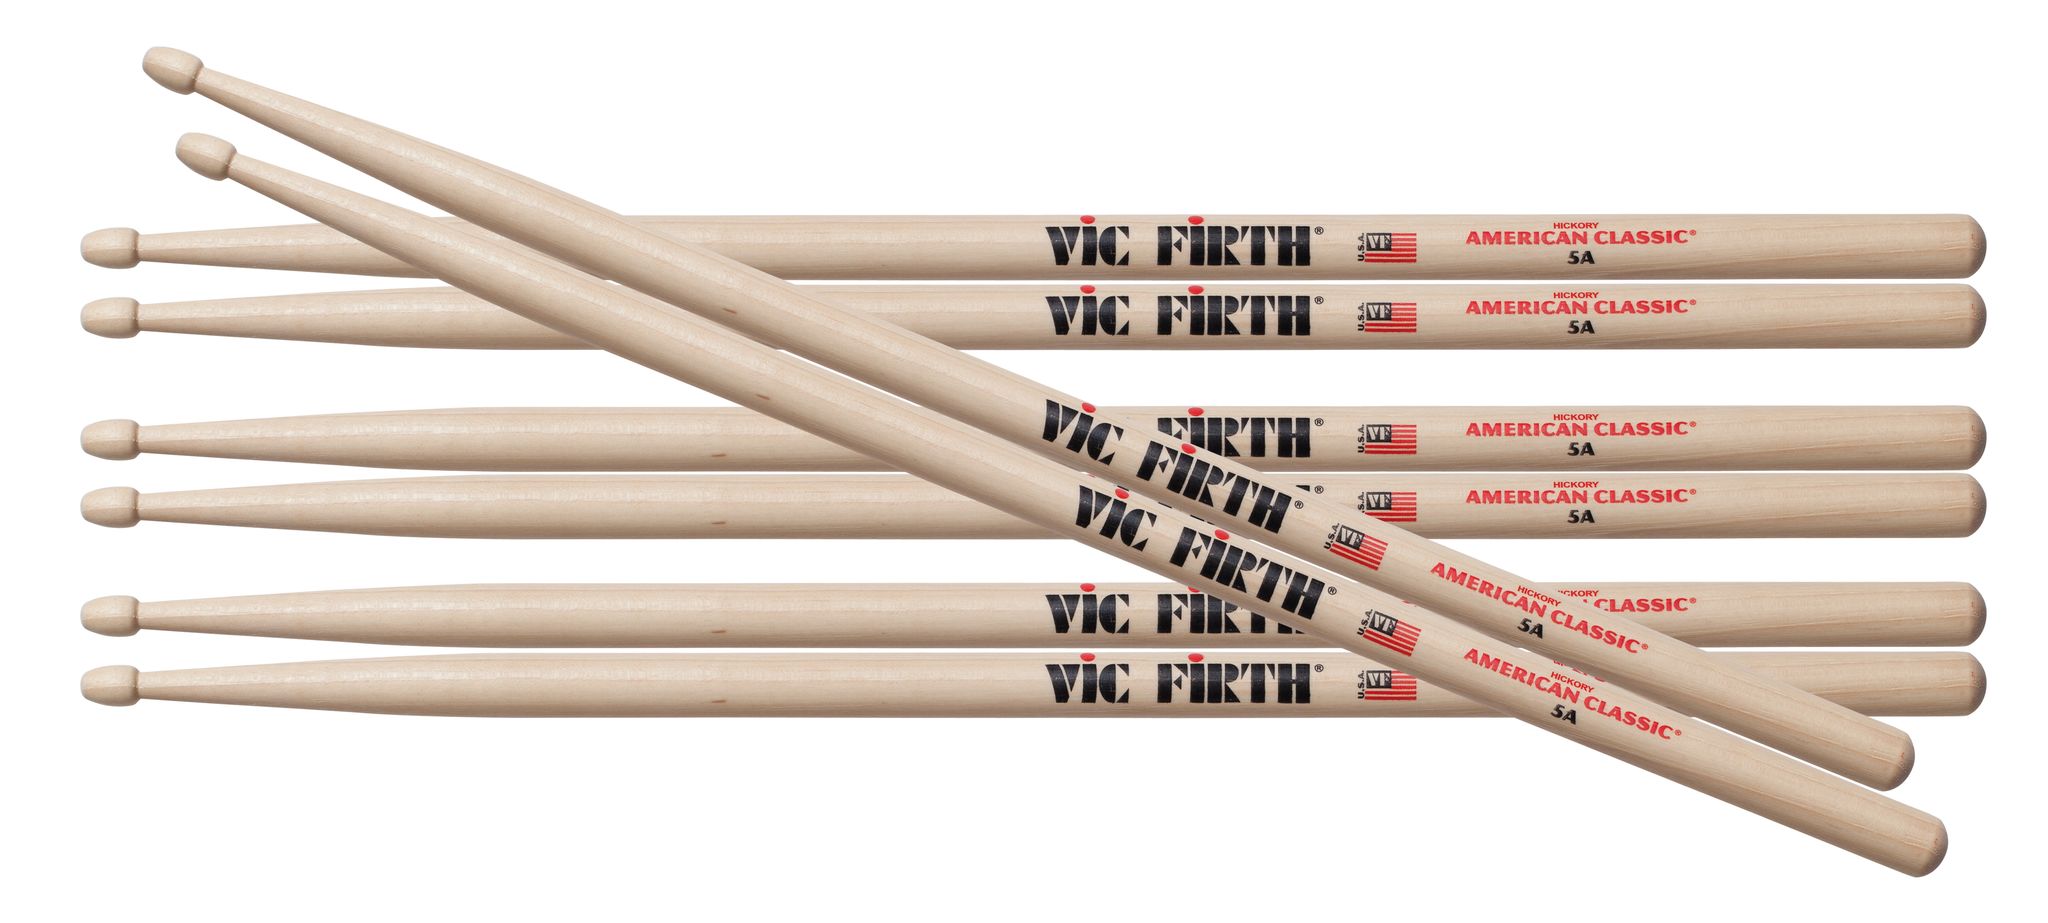 Køb Vic Firth 5A American Classic Hickory Value Pack - Pris 319.00 kr.